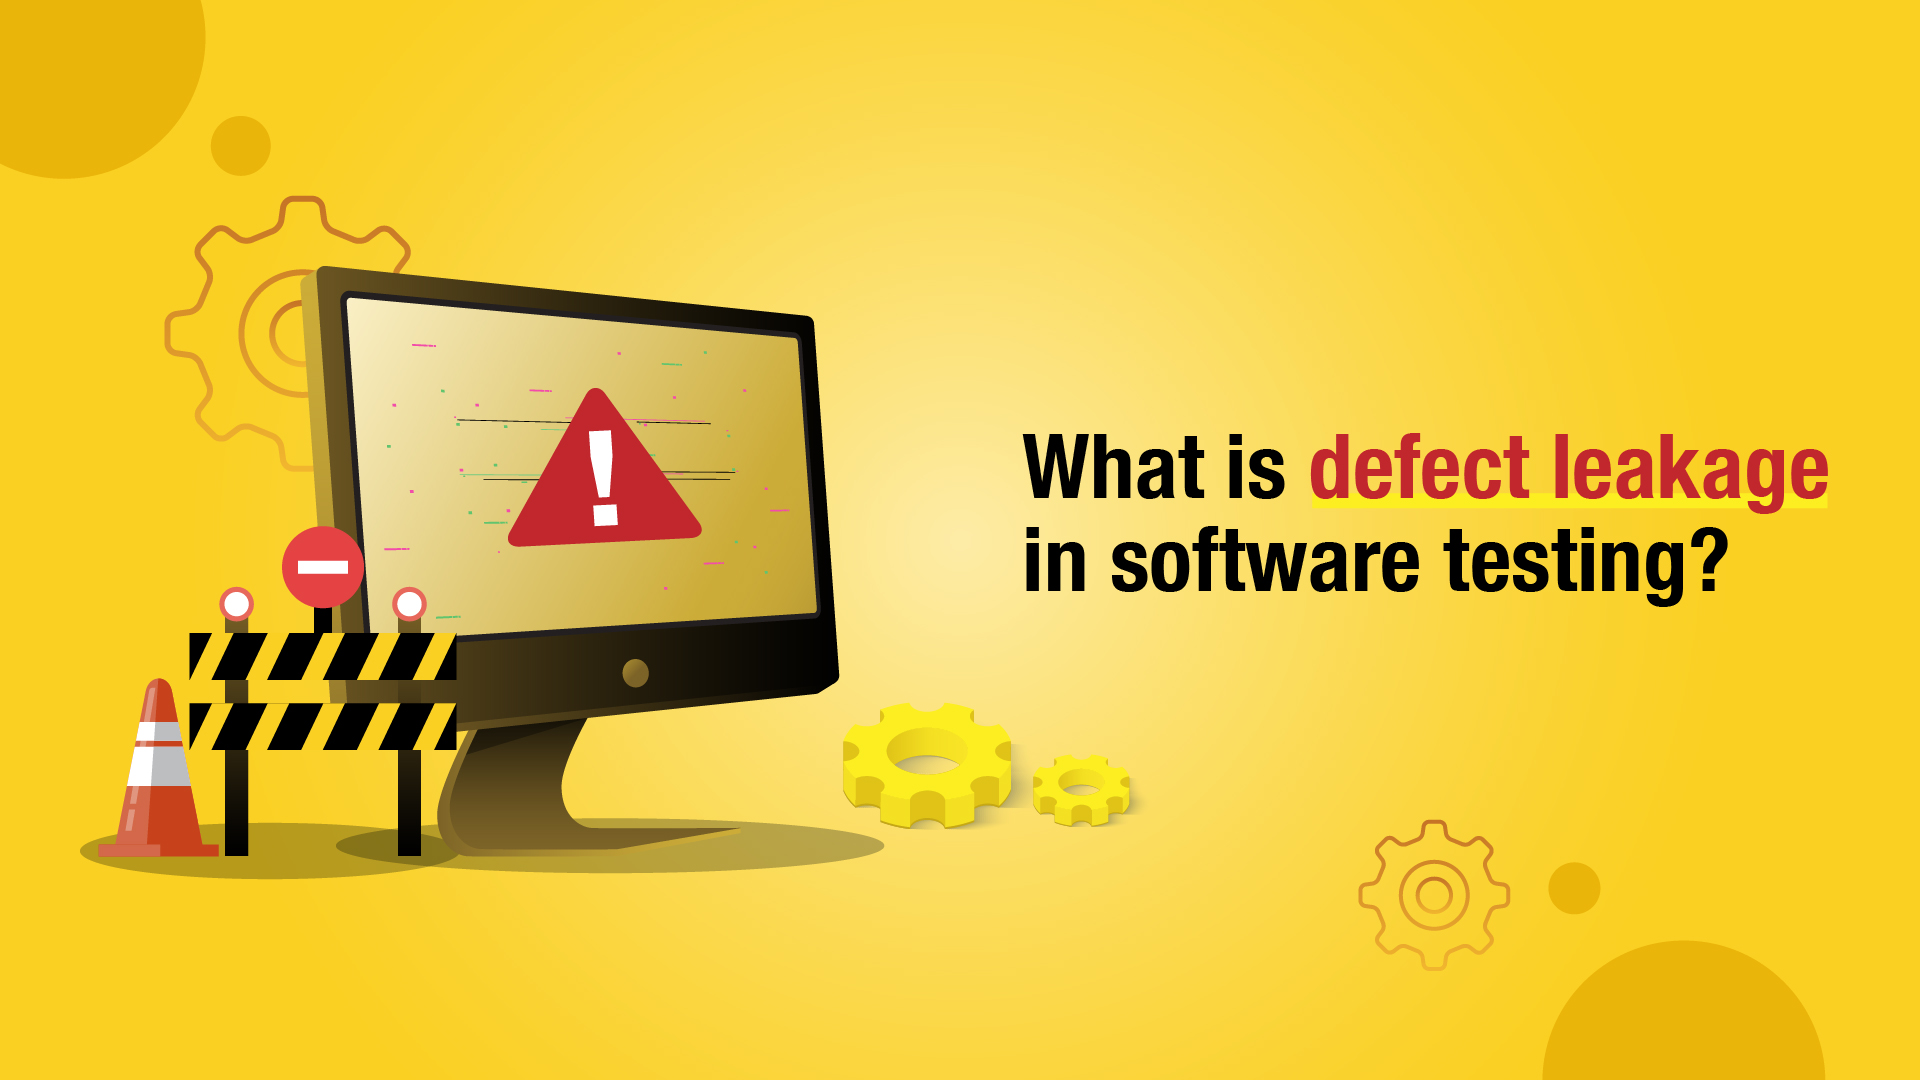 defect leakage in software testing